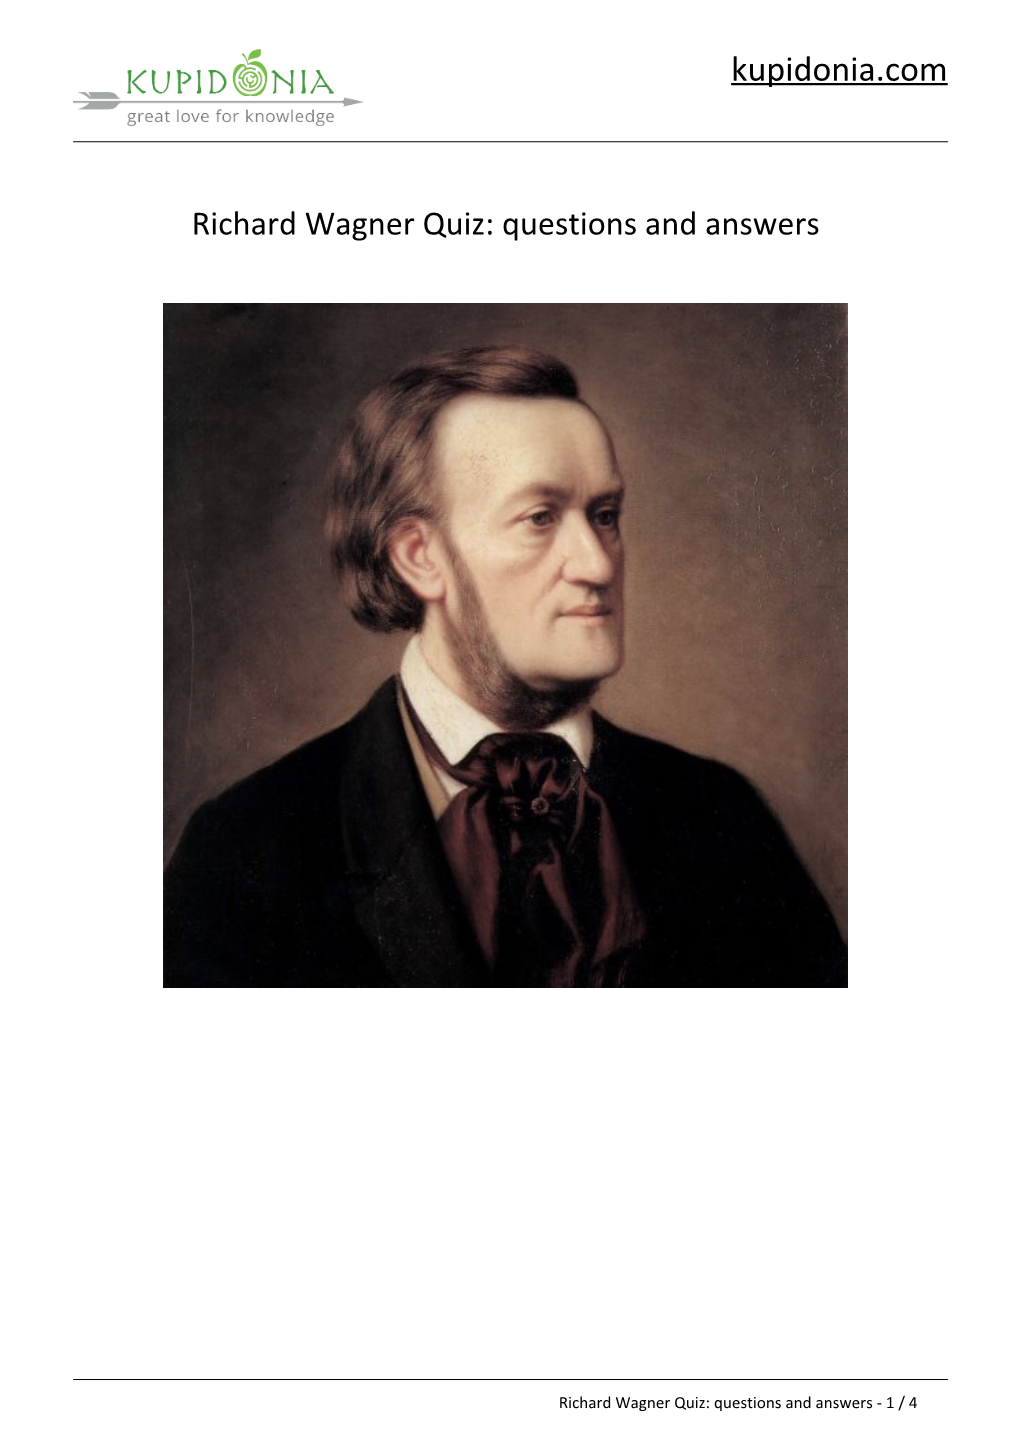 Richard Wagner Quiz: Questions and Answers